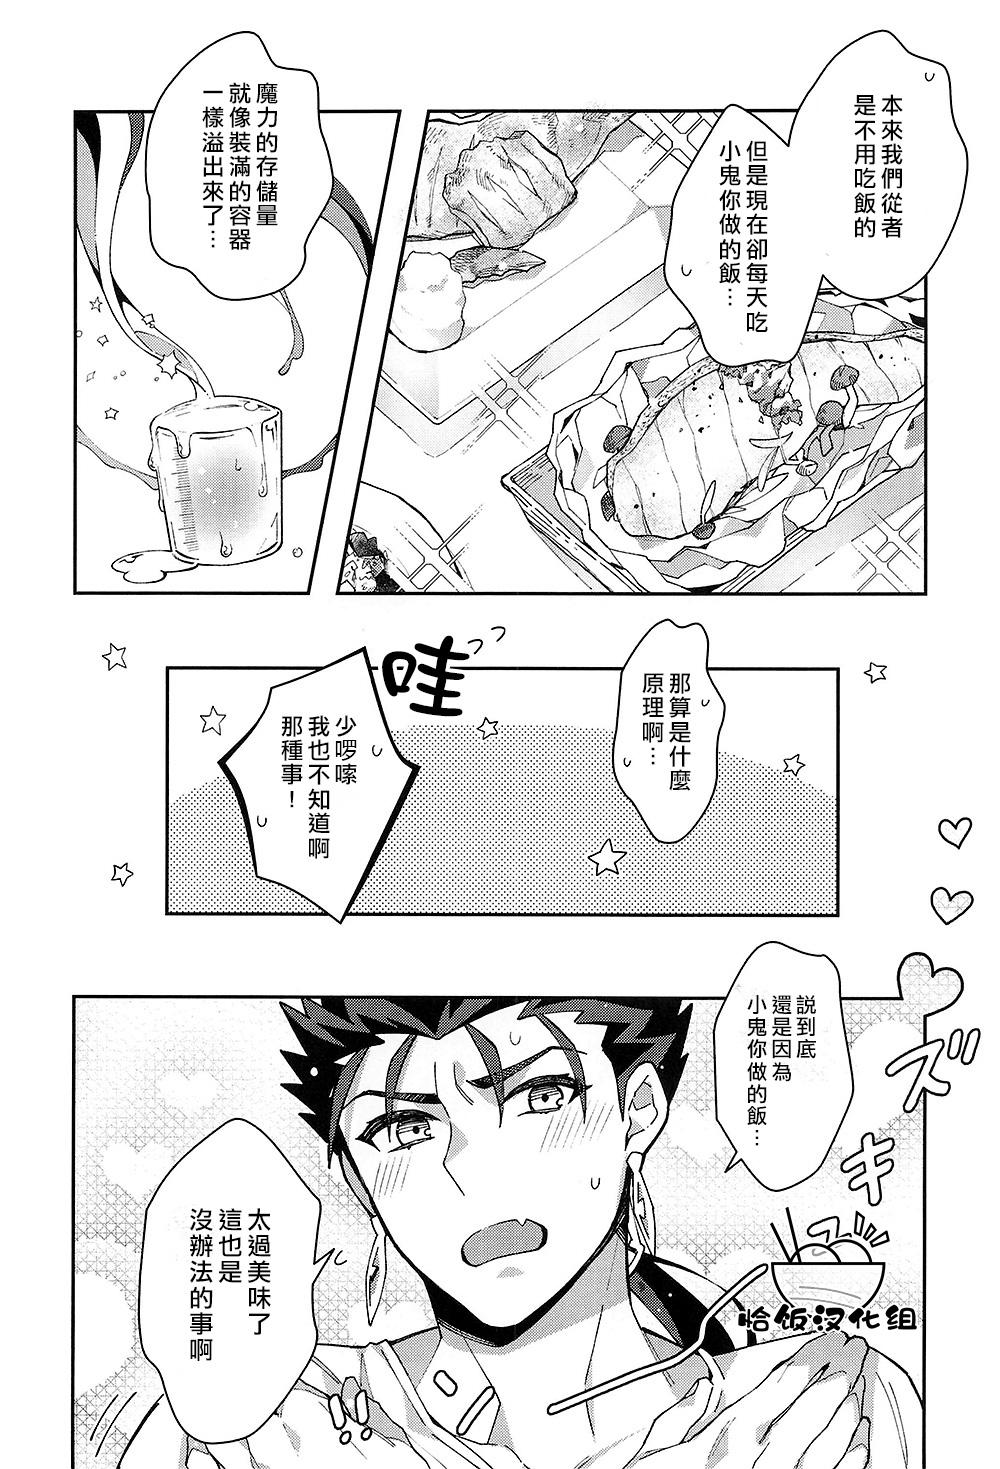 Clothed 坊主の飯が美味いせいで乳から魔力がとまらない！ - Fate stay night Bang Bros - Page 7